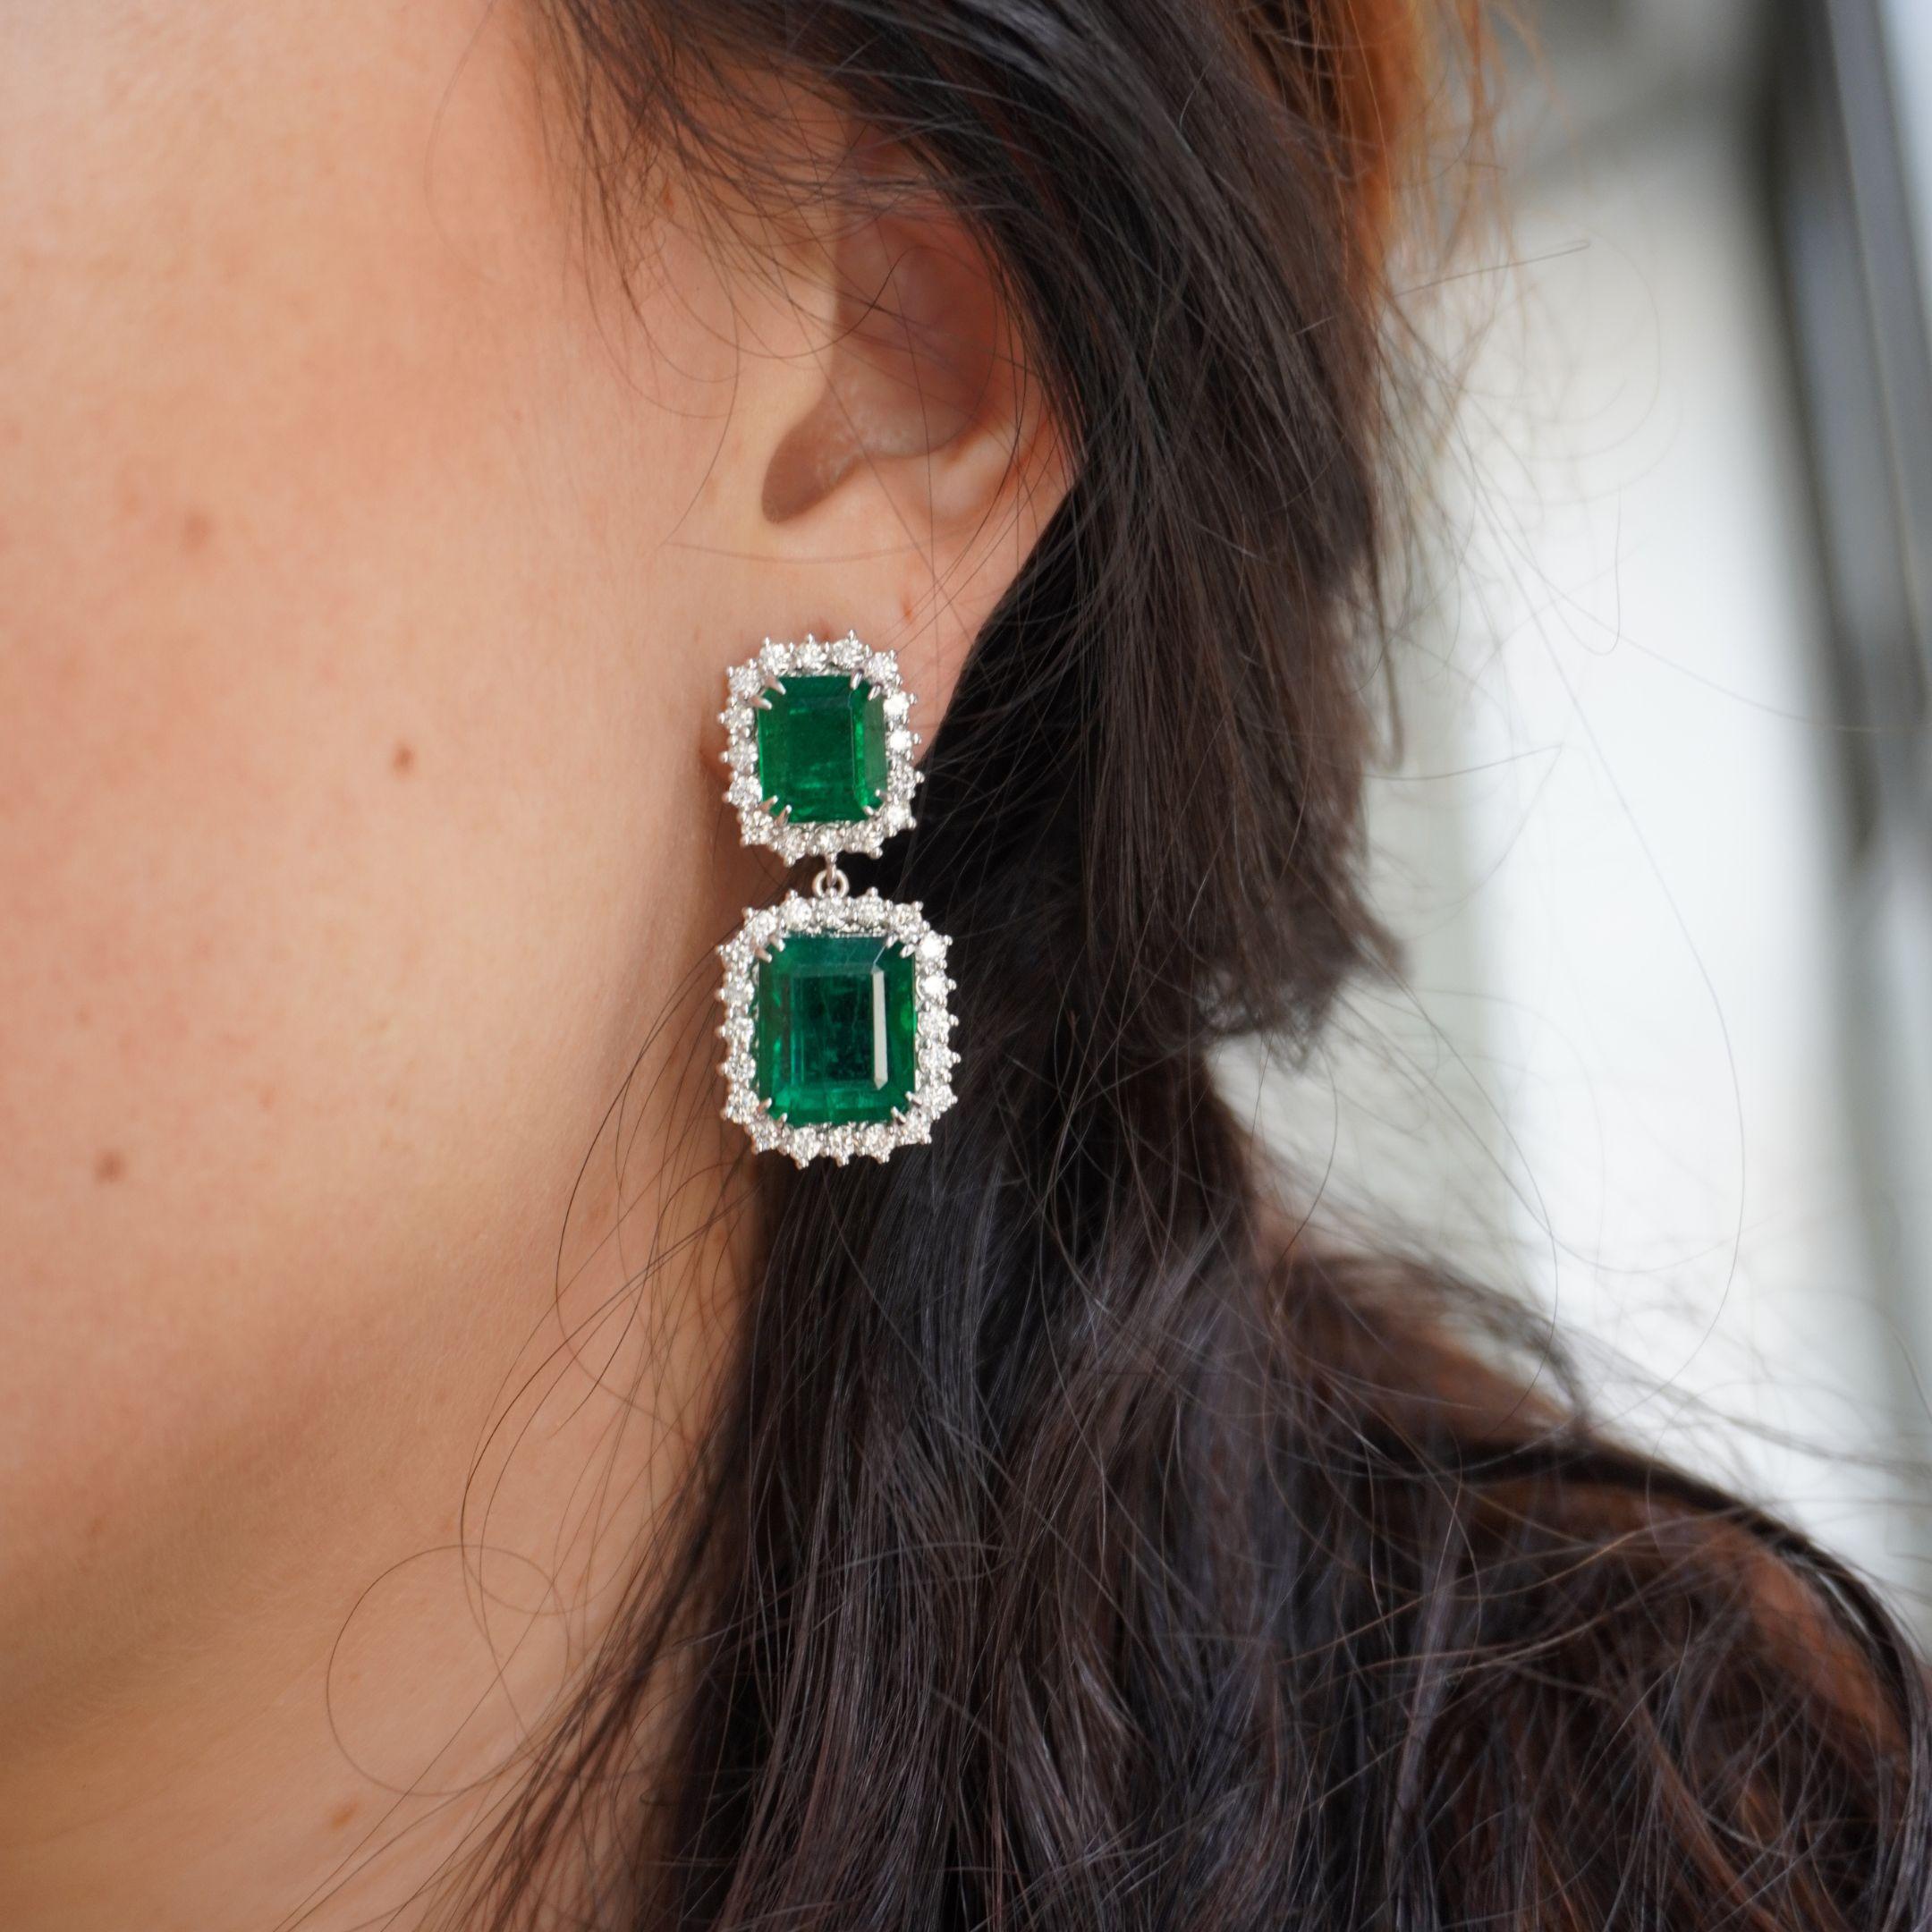 20 Carat Emerald Dangle Earrings With 2.5 Carat Halo Diamonds 18K White Gold In New Condition For Sale In New York, NY